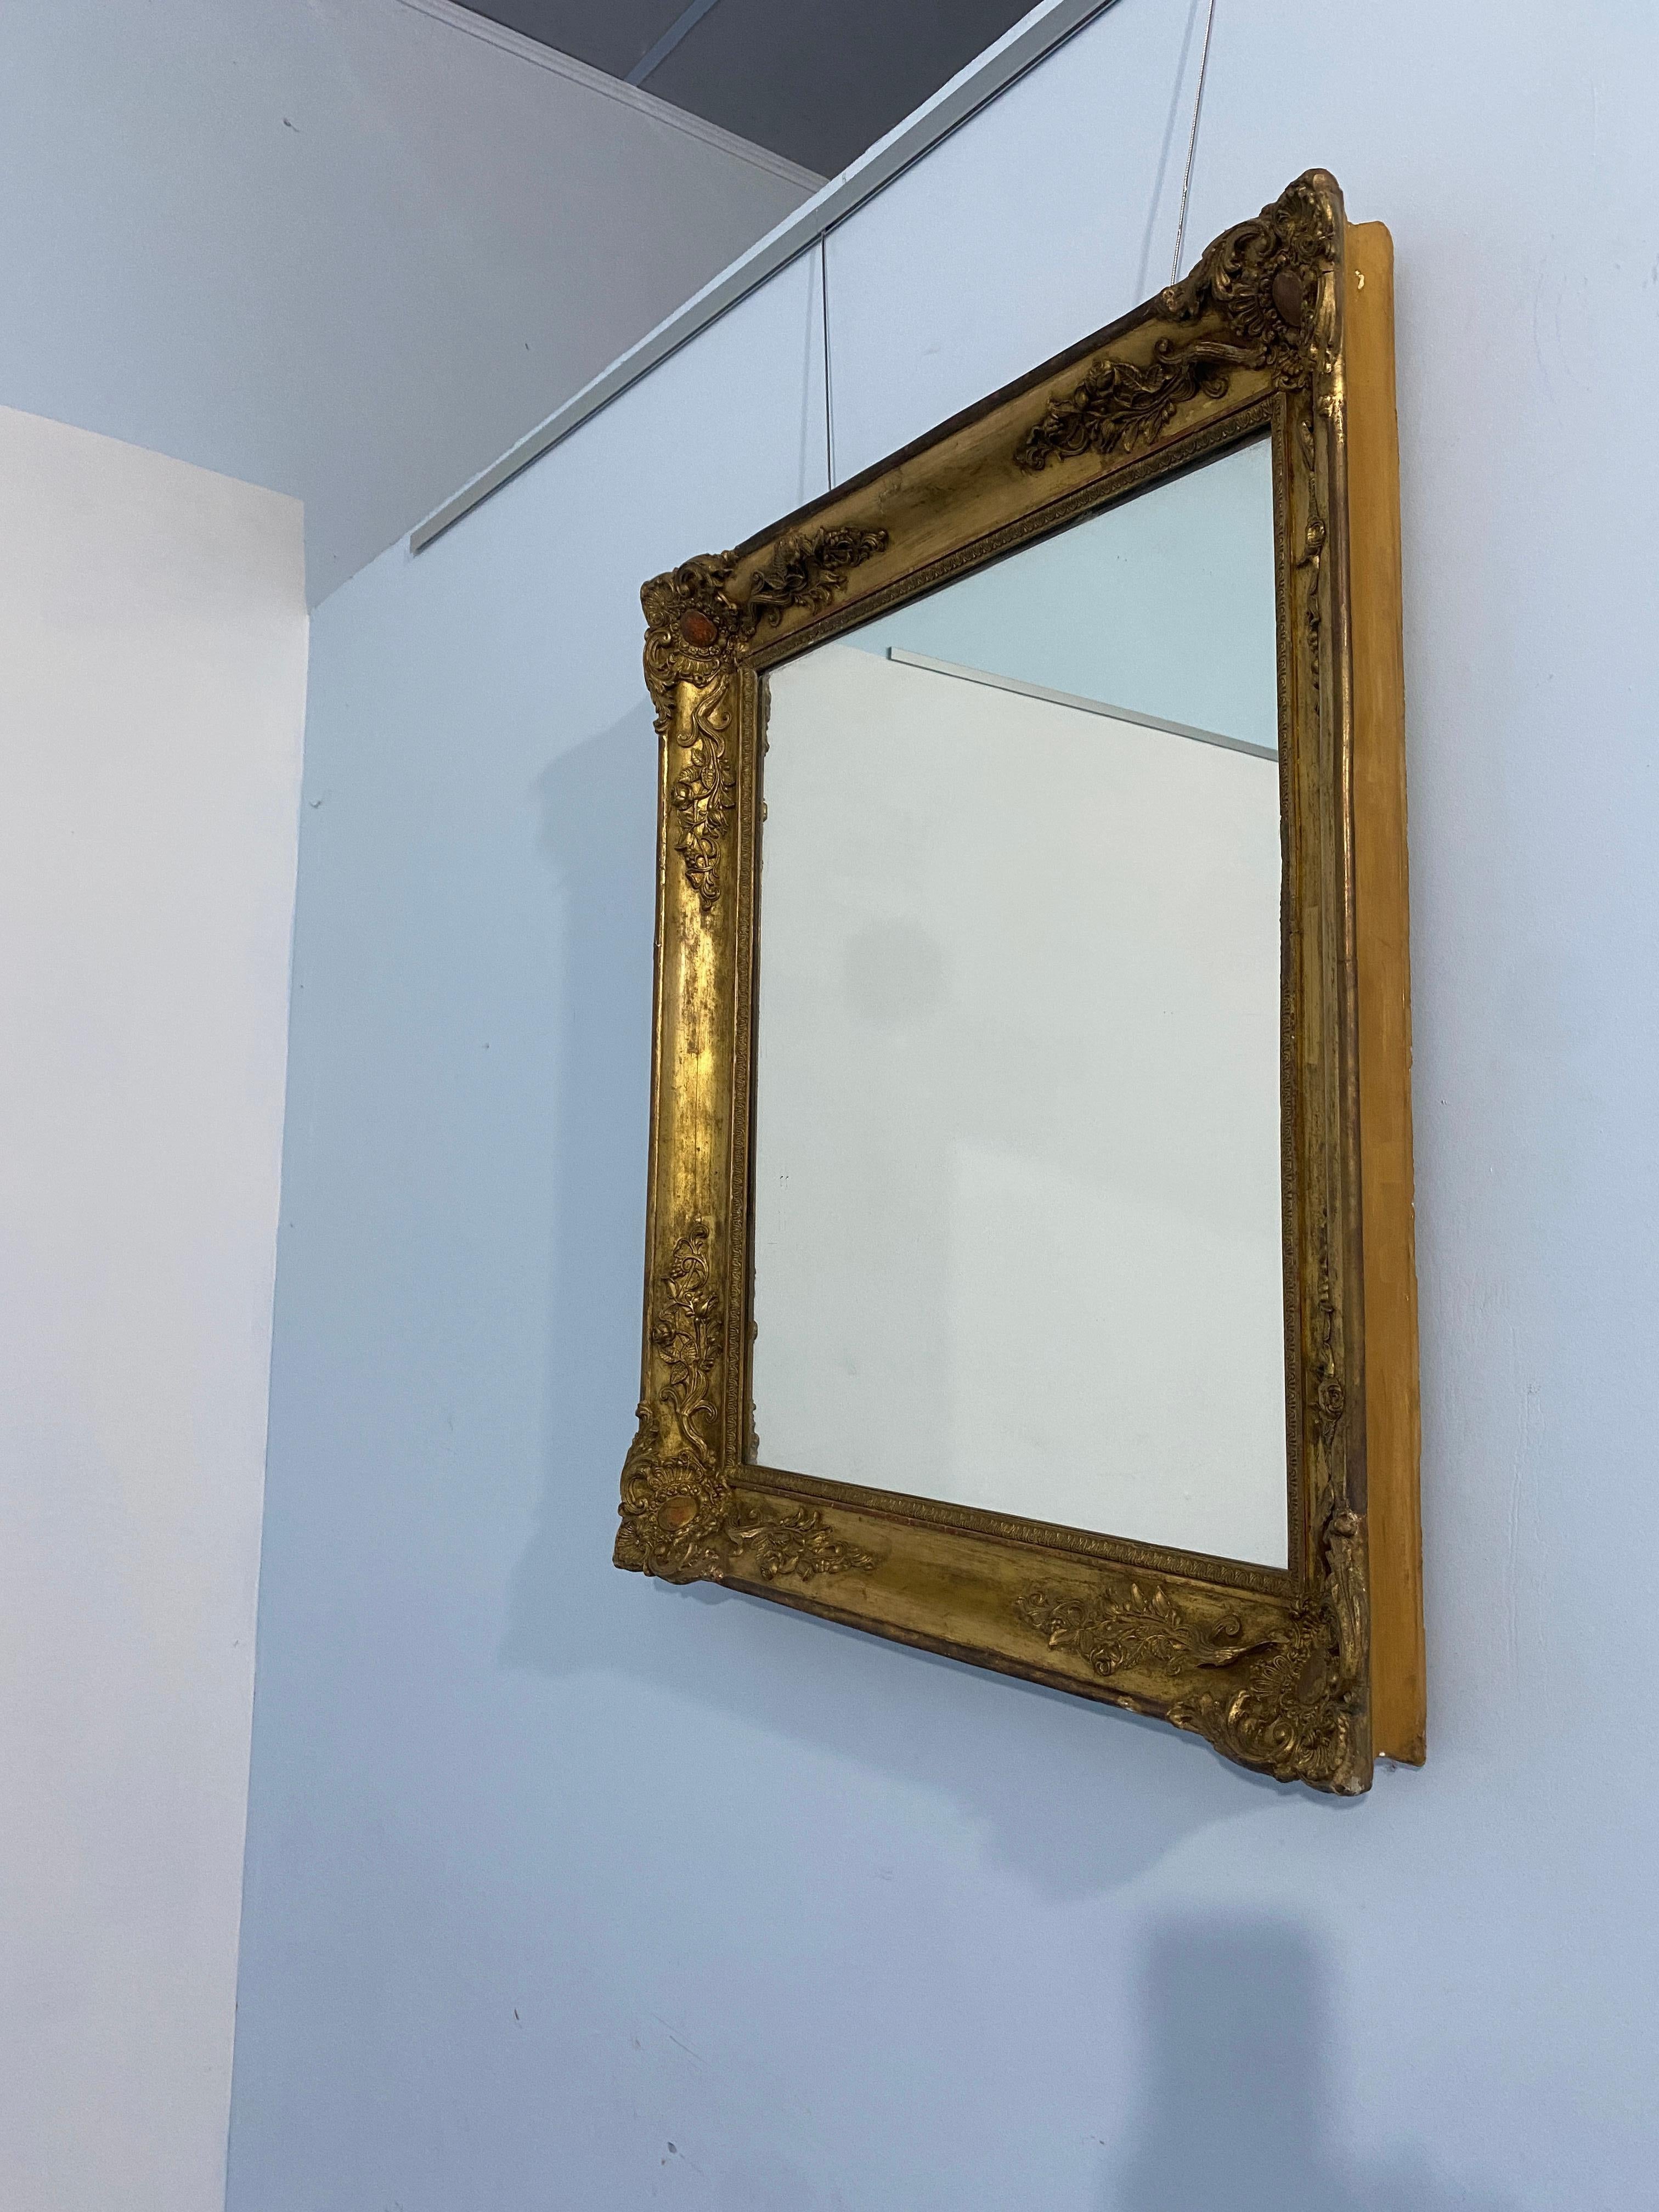 Antique French gilded gold-leaf mirror Napoleon Third era,1870,characteristic of the period are the fine decorations adorning the four corners of the frame.
The condition is very good for still being the original one